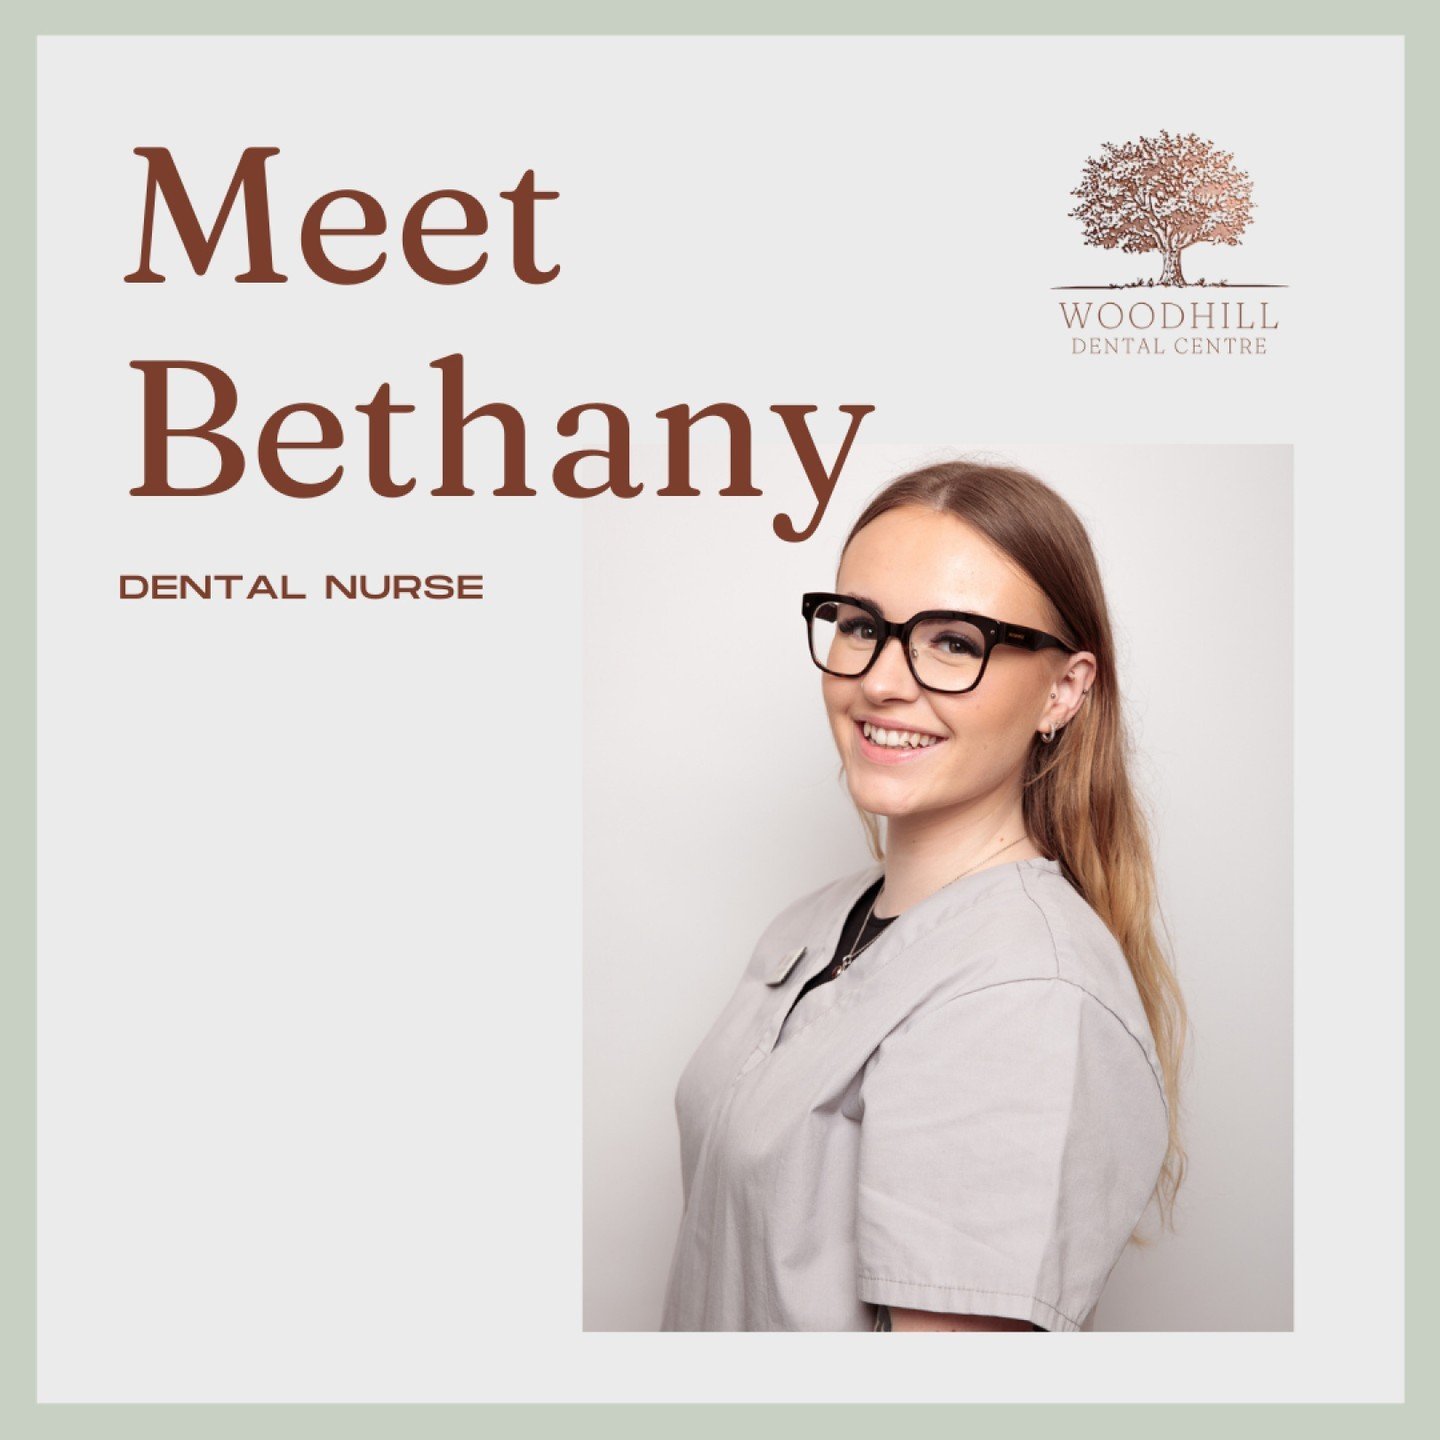 MEET THE TEAM MONDAY: Introducing Bethany

Joining Woodhill in August 2021, Bethany brings her expertise as a qualified dental nurse since 2017.

With a passion for all aspects of her job, she finds great reward in making patients feel comfortable du